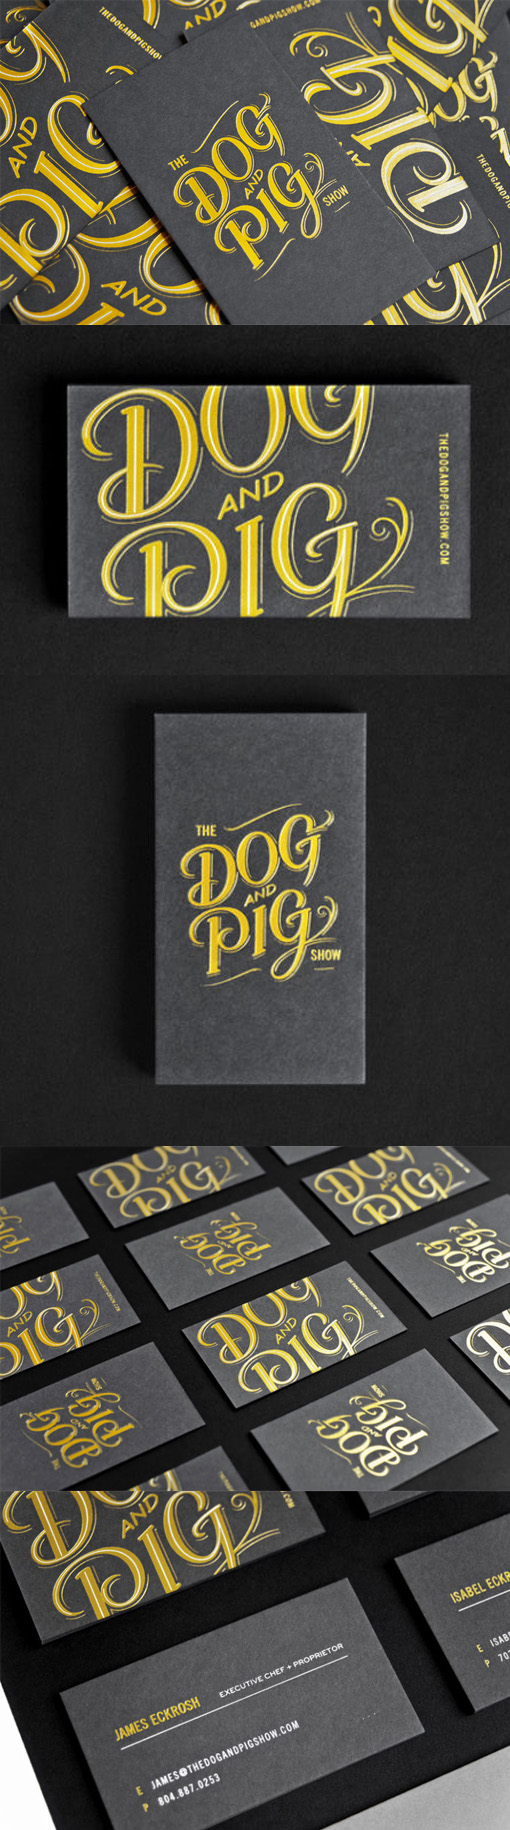 Vibrant Typography On A Black Business Card For A Restaurant